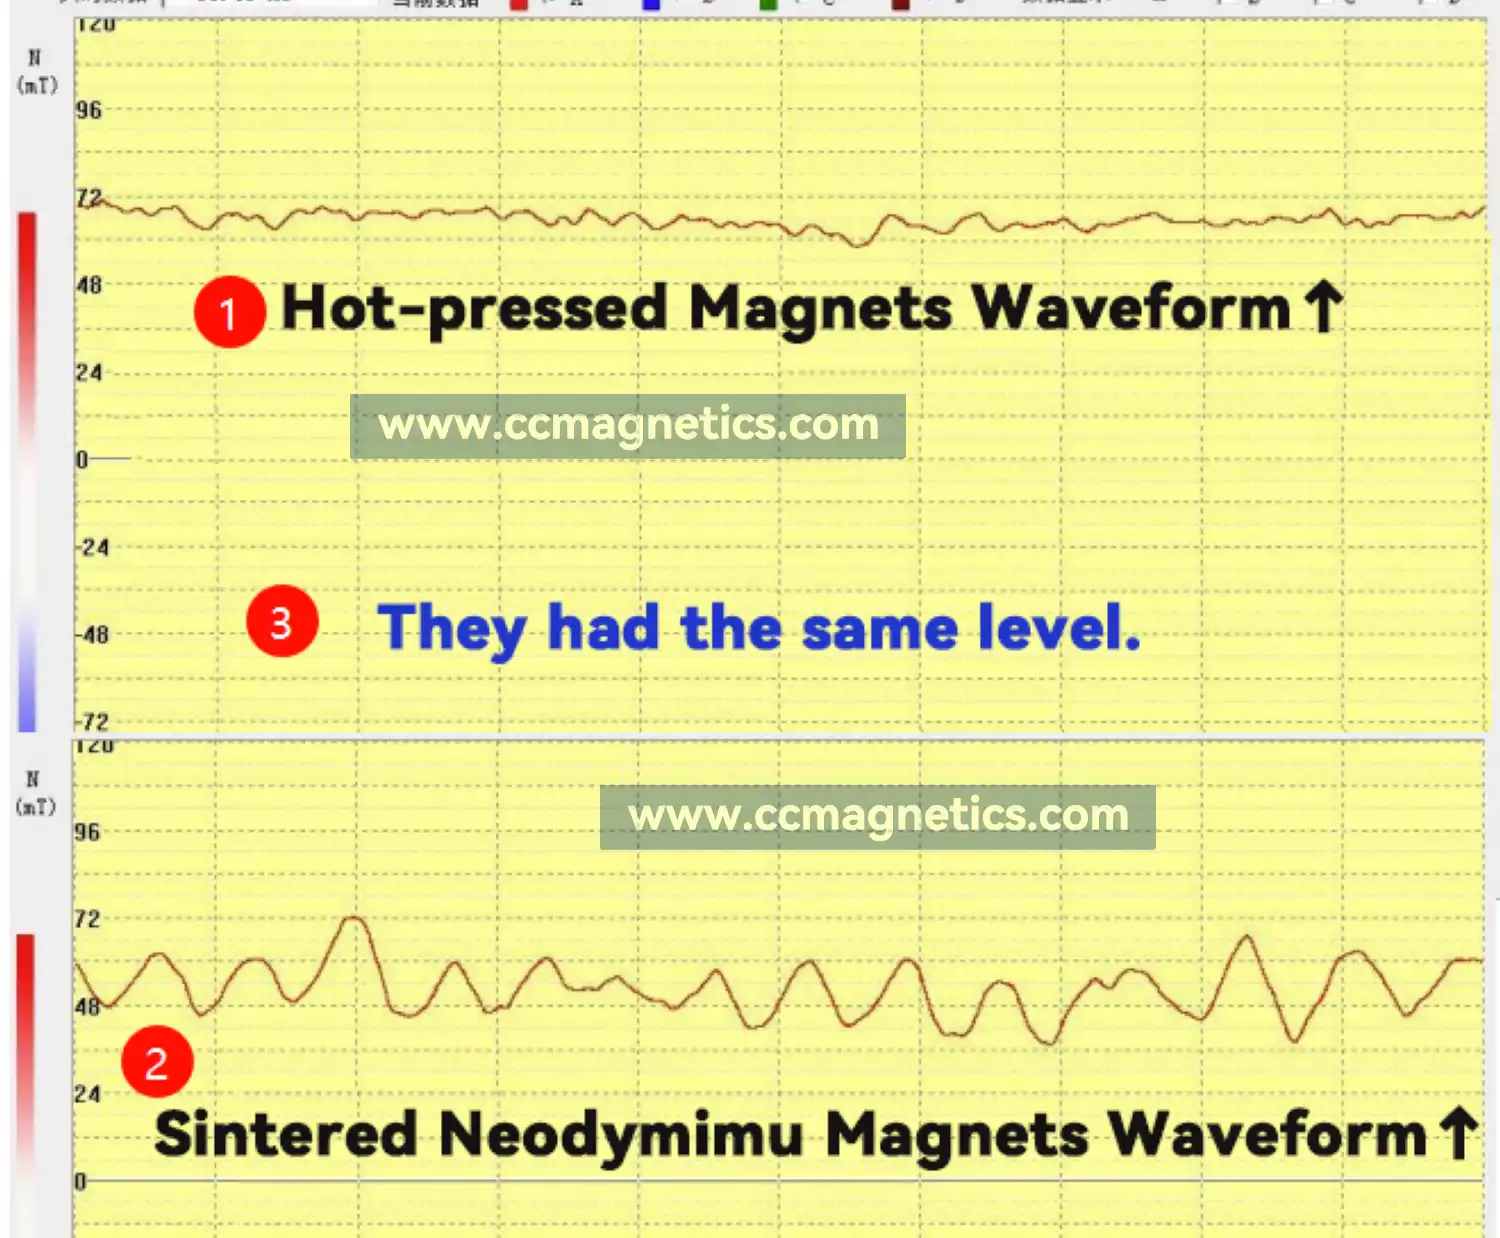 Waveform comparison of hot-pressed Neodymium magnets and sintered NdFeB magnetic rings